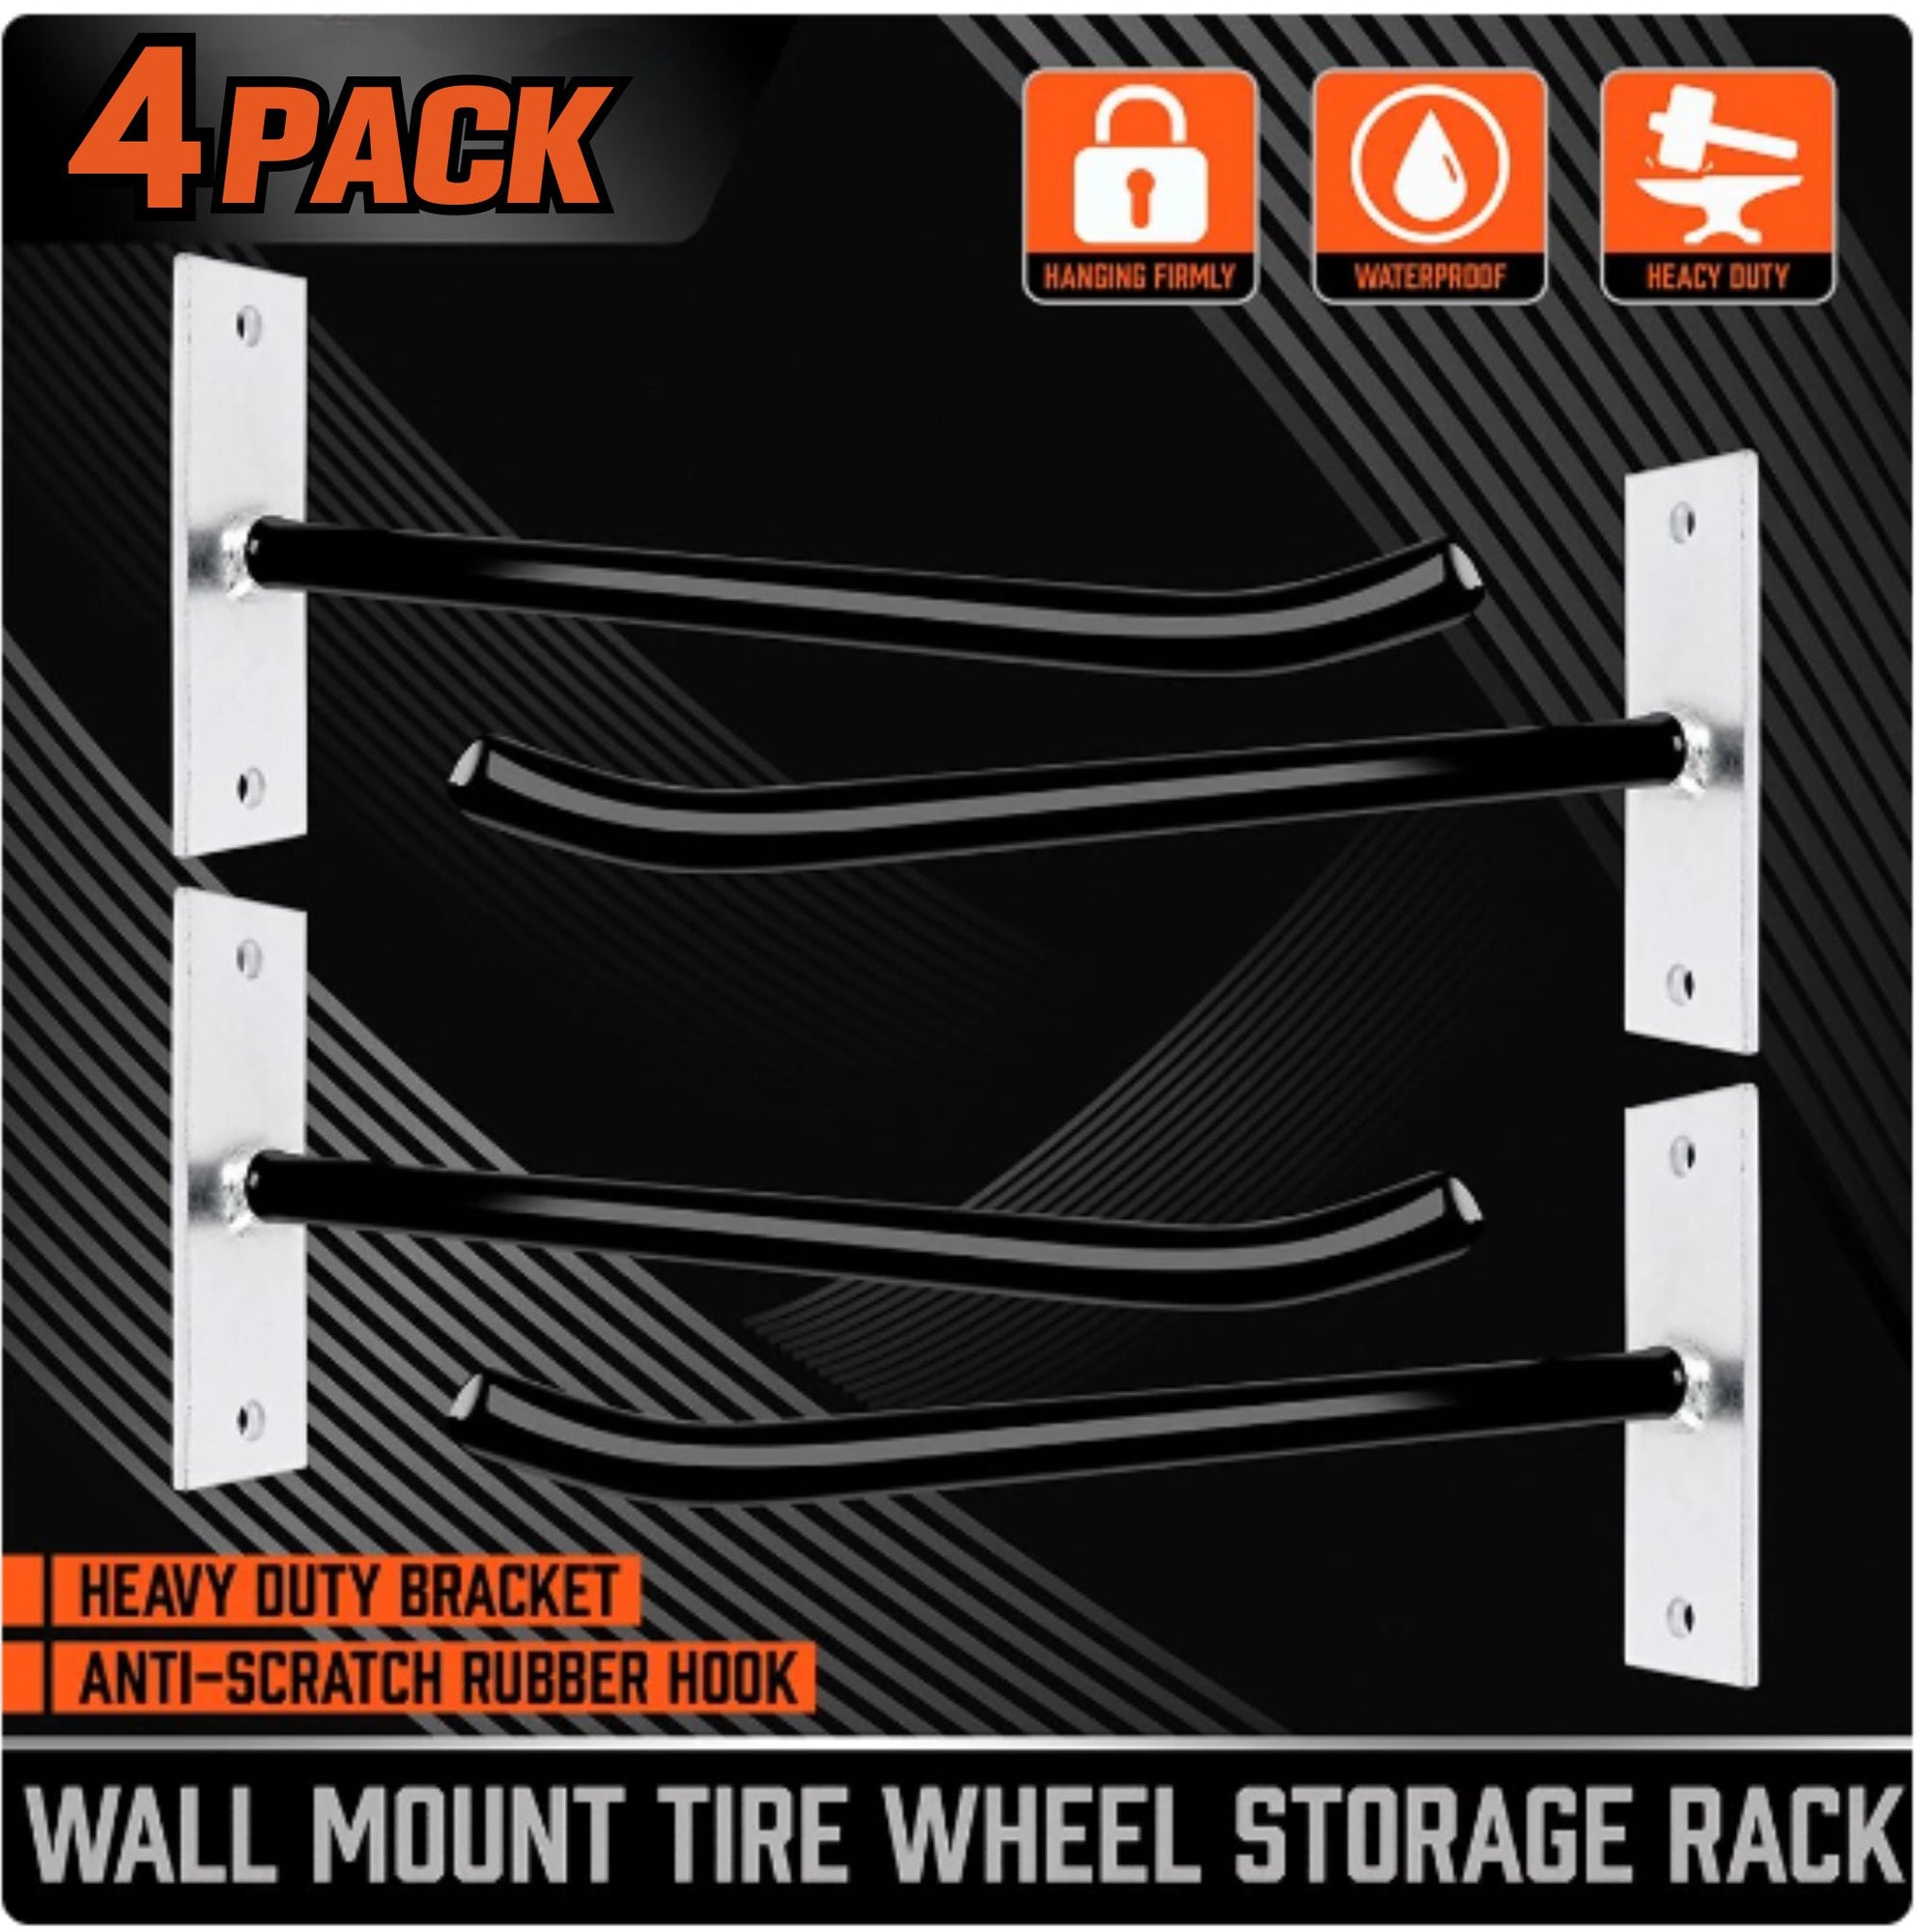 4 Pack Heavy Duty Steel Garage Wall Mount Storage Rack - South East Clearance Centre